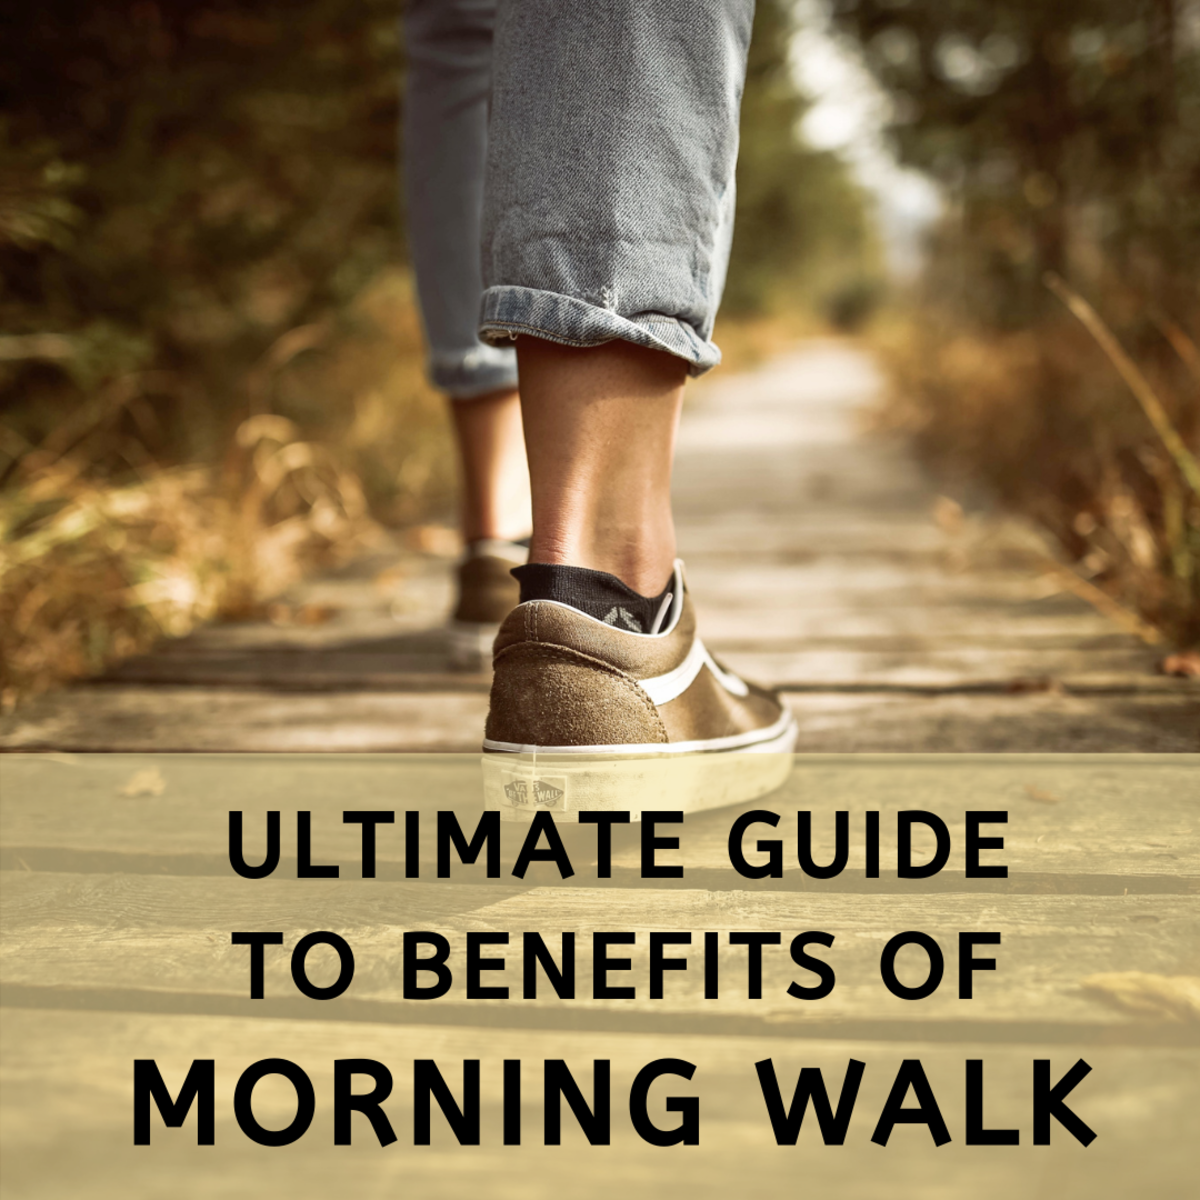 The Ultimate Guide to Benefits of Morning Walk